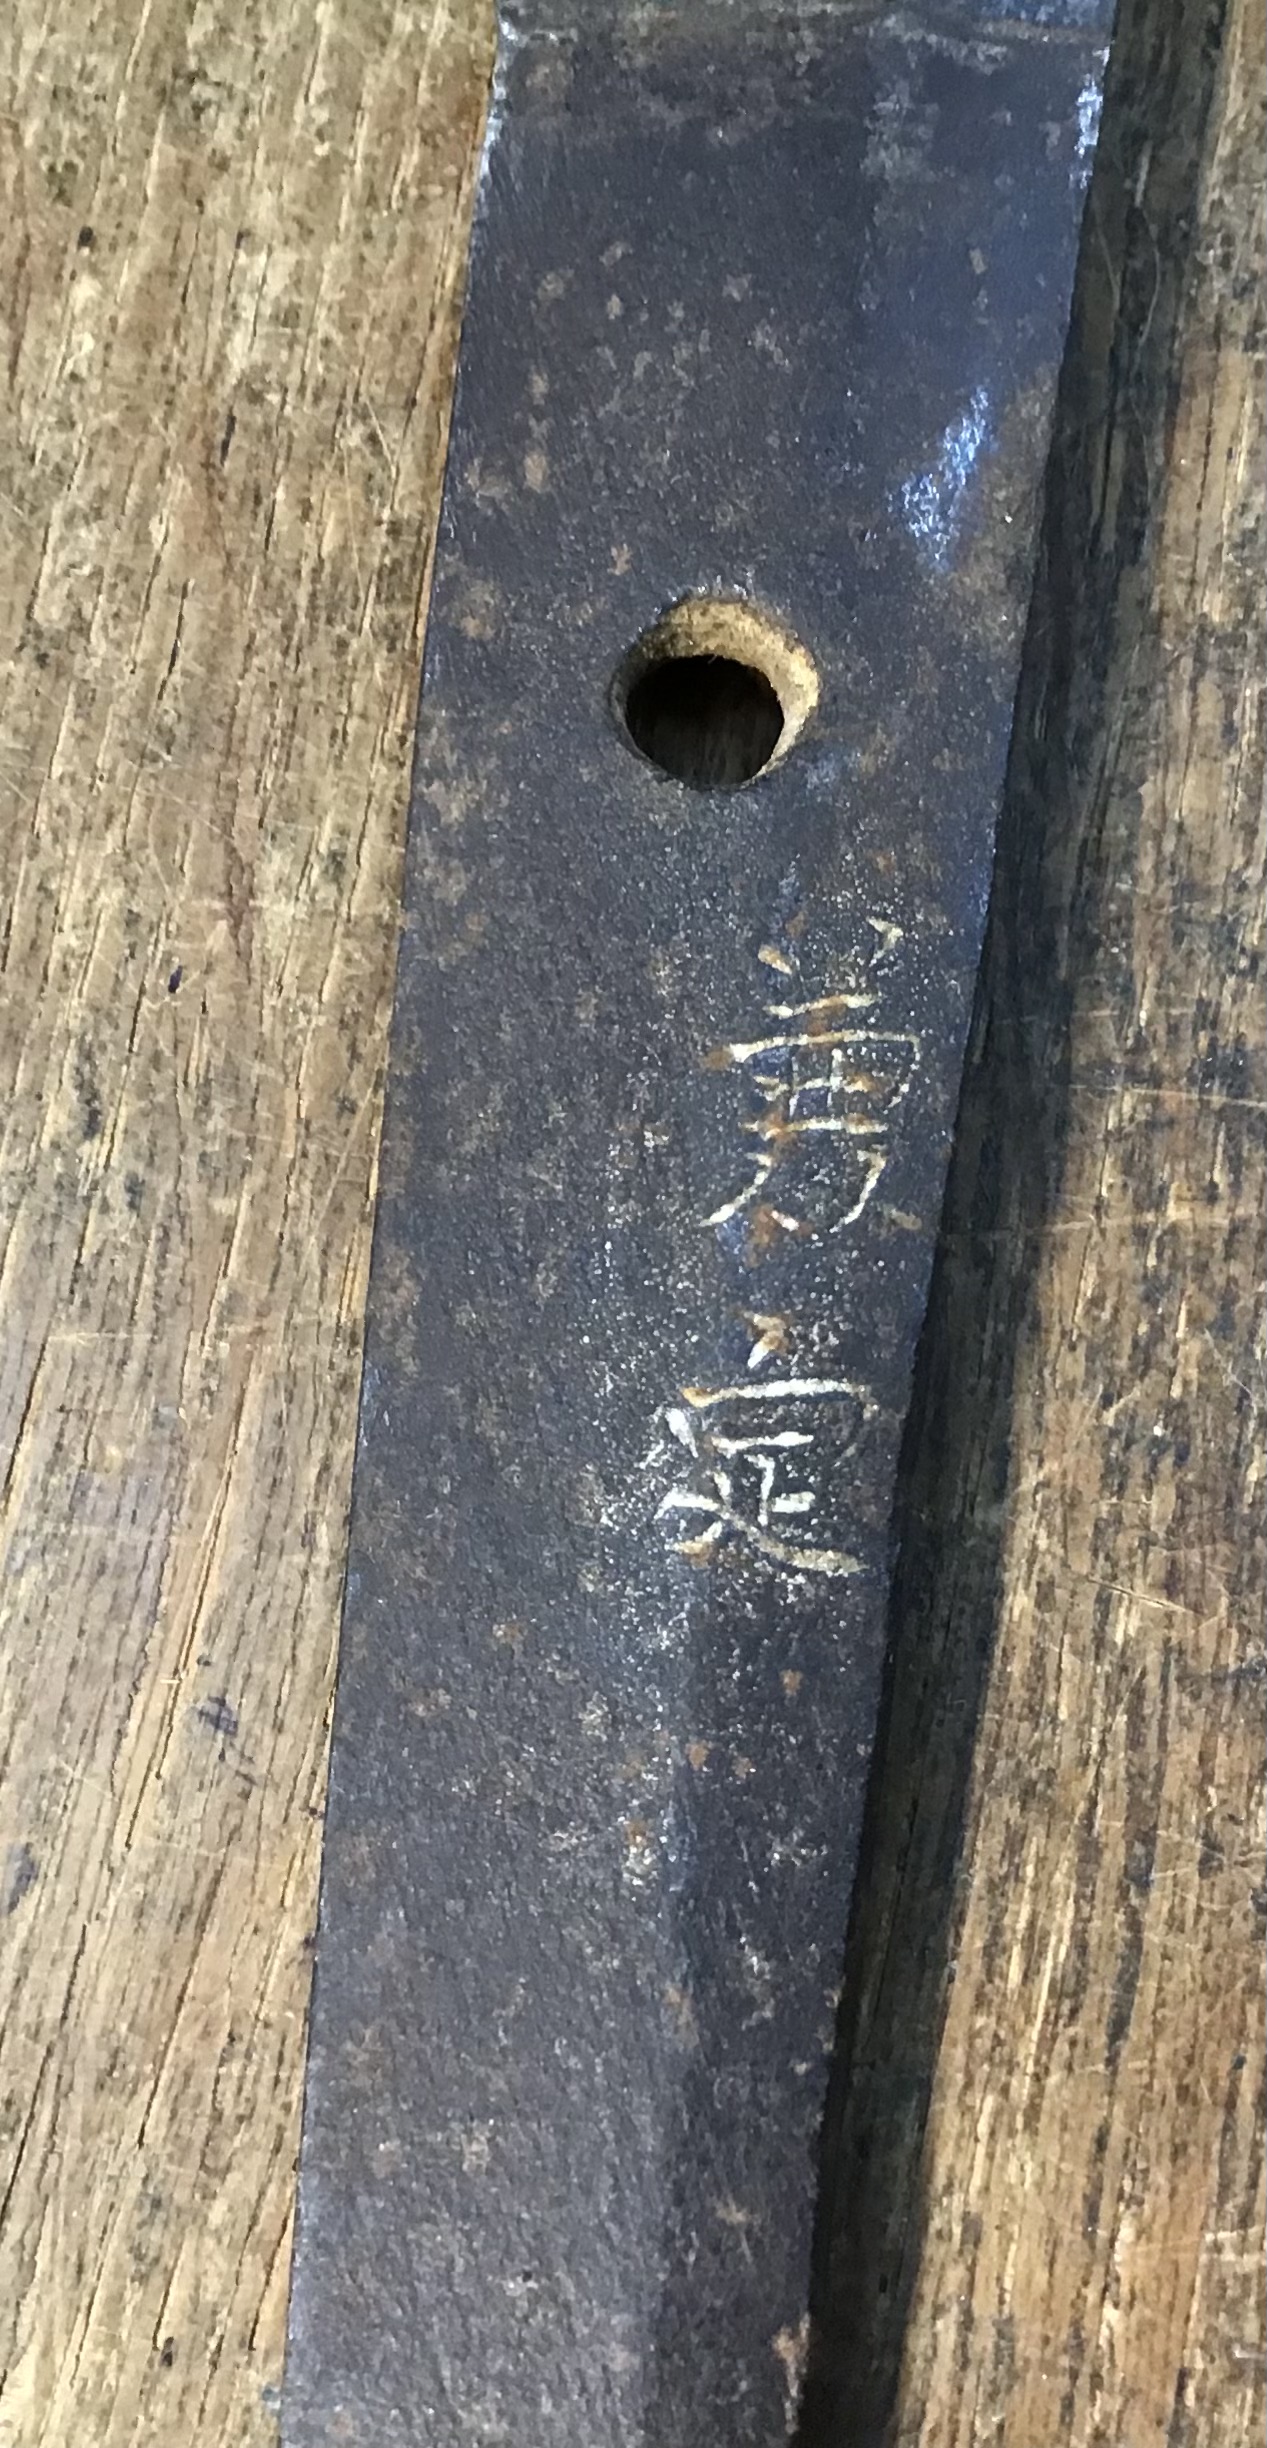 19th Century Japanese Katana Sword (blade could be older), Signature to tang, black lacquered - Image 3 of 21